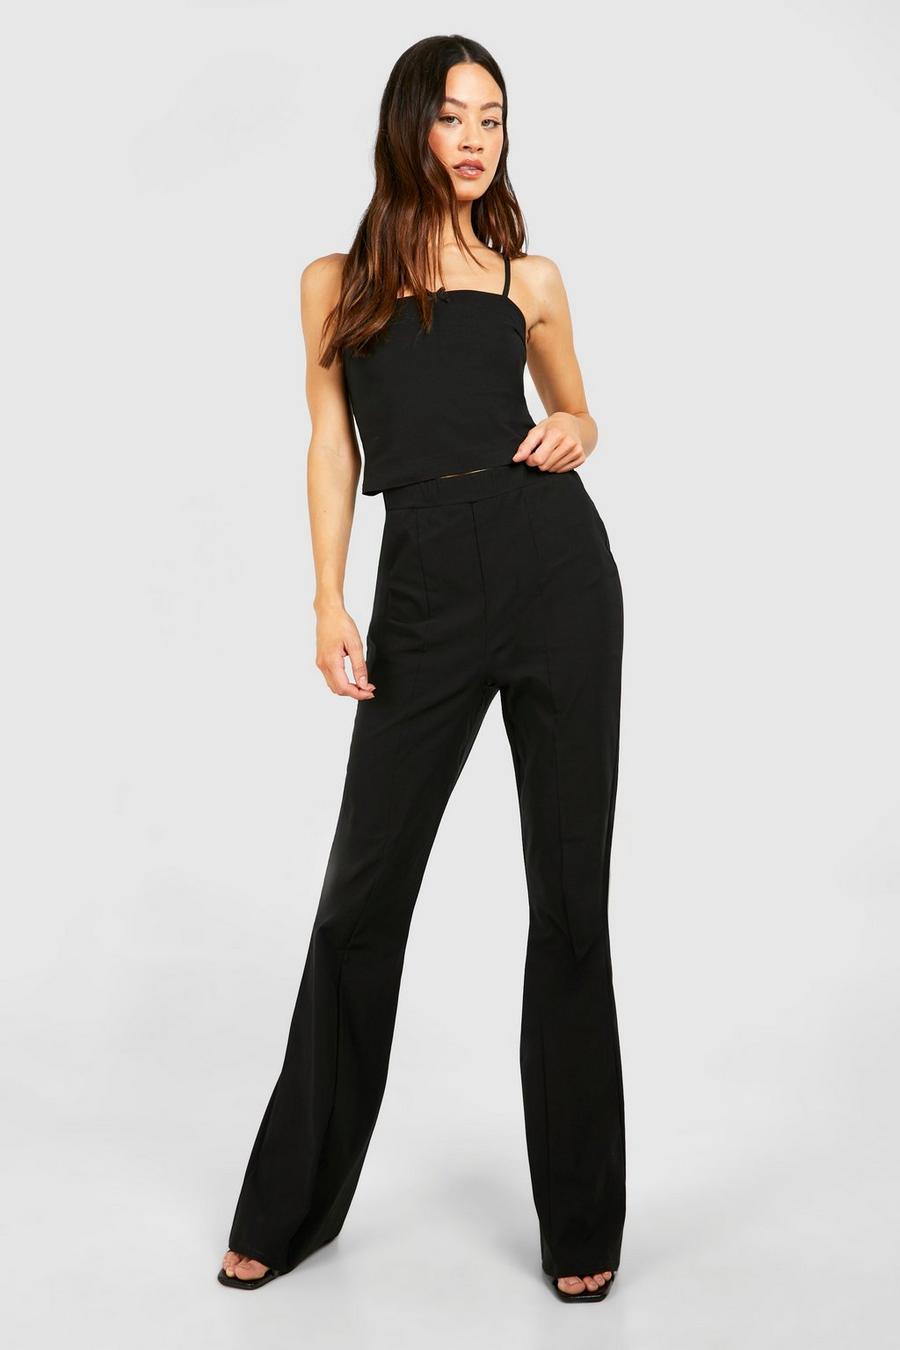 Black Tall Bengaline Stretch Fit And Flare Pants